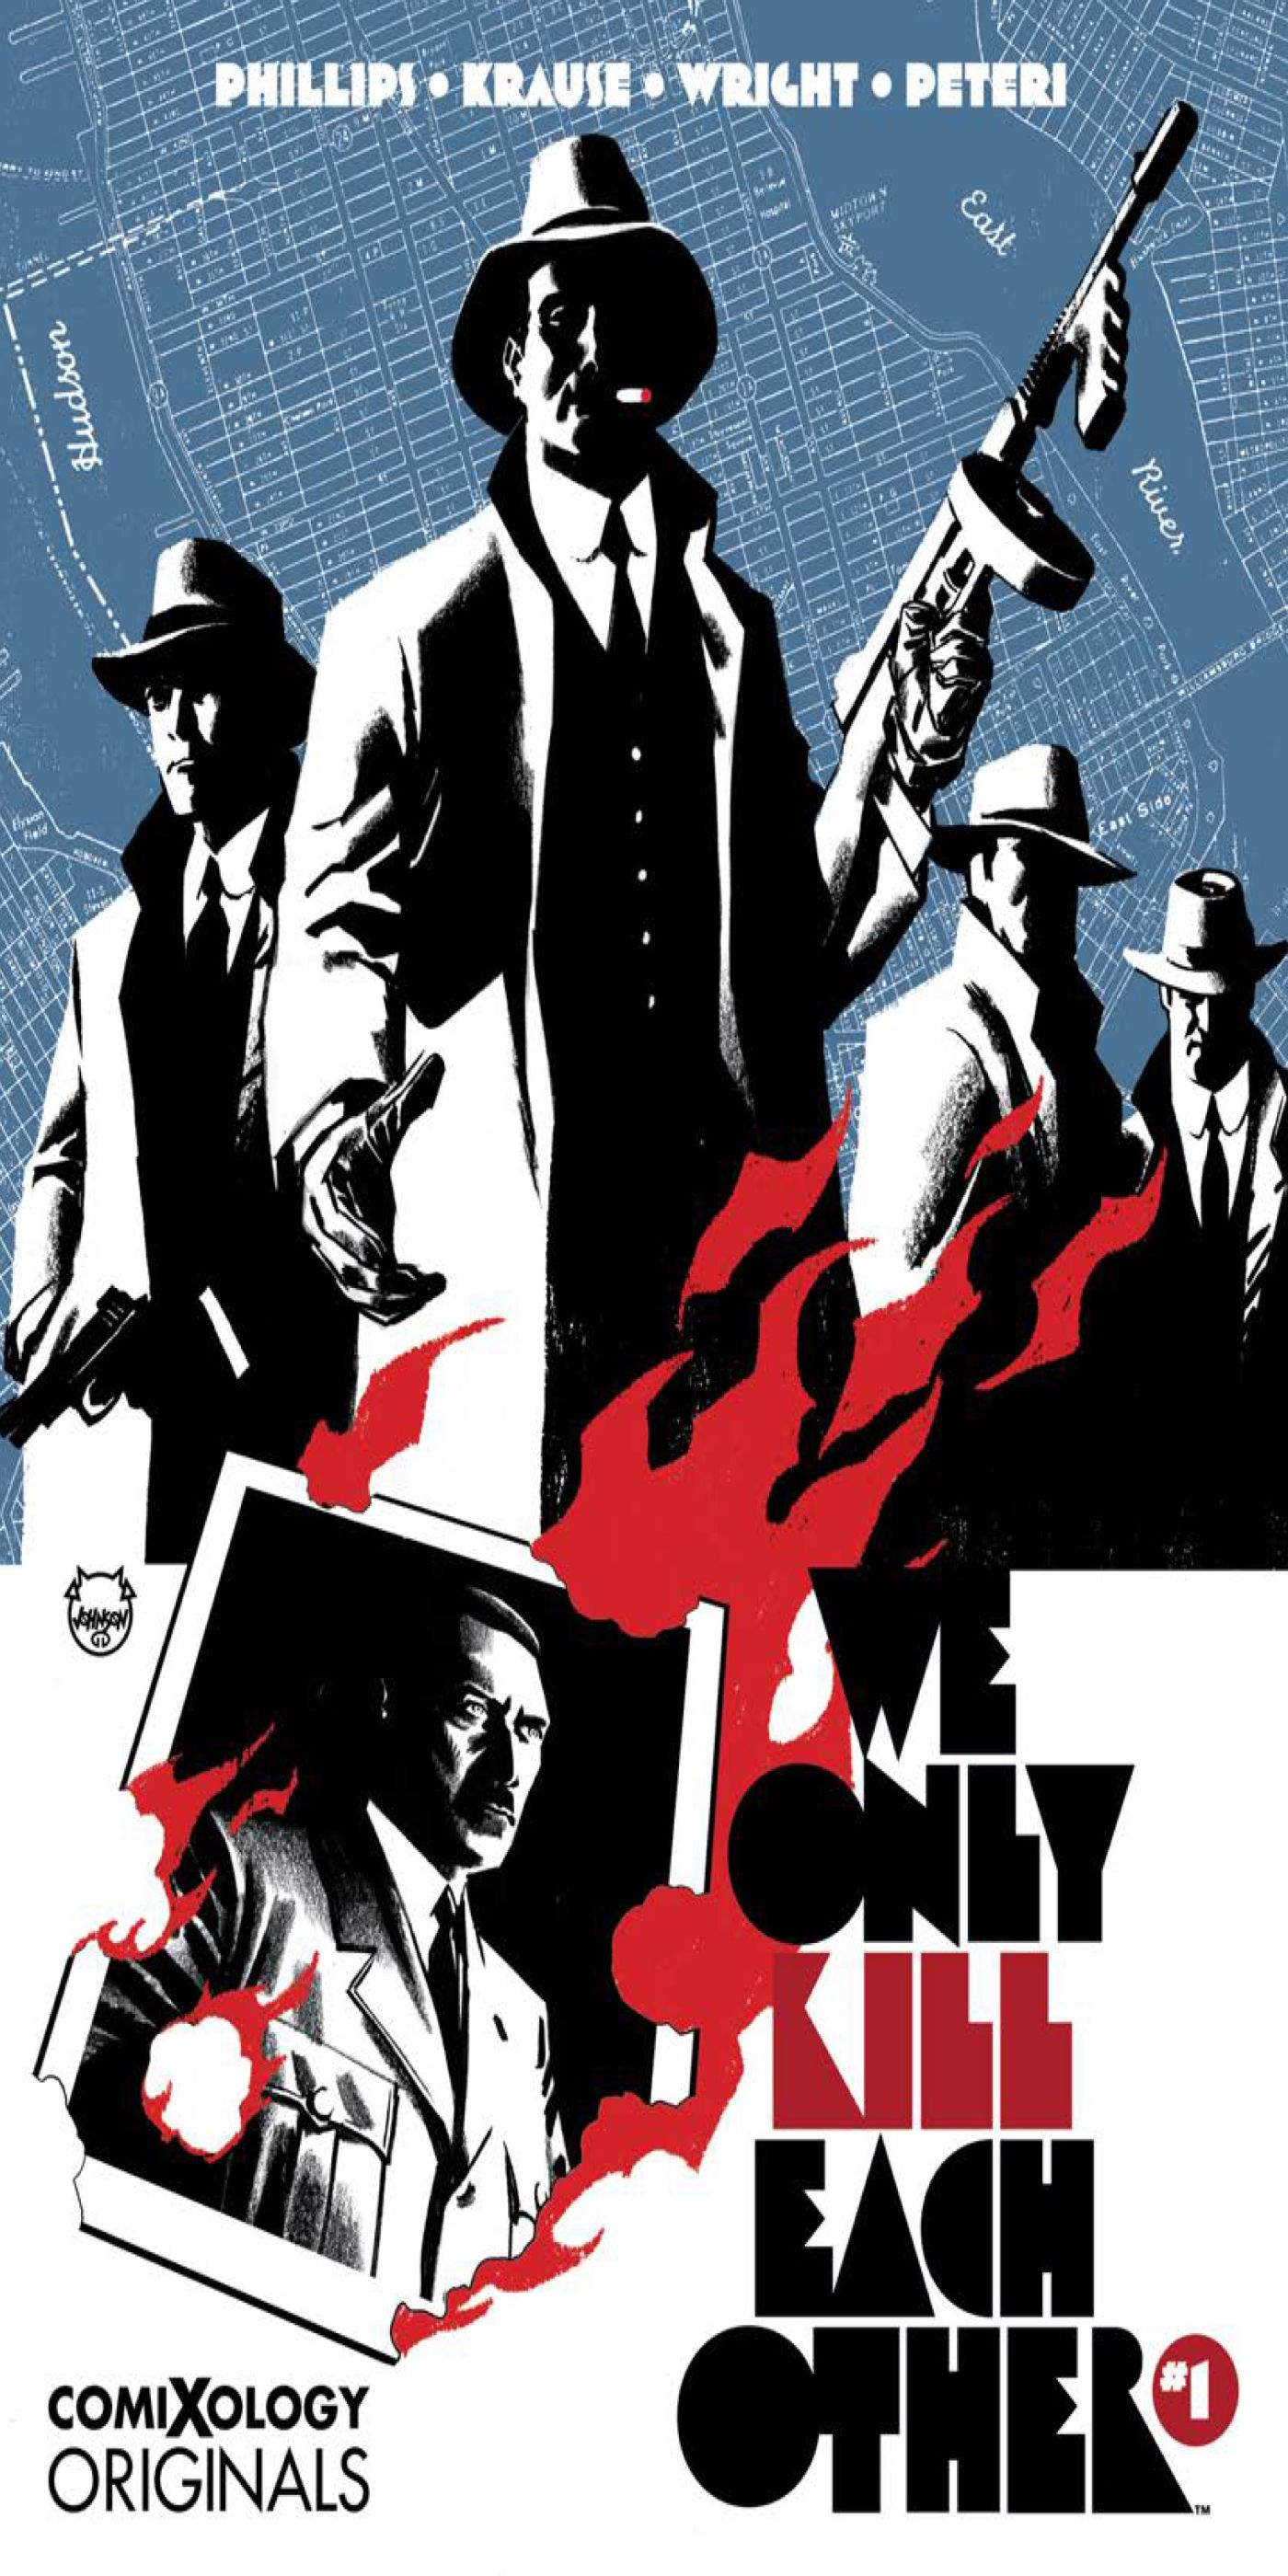 We.Only.Kill.Each.Other.1.comiXology.Originals.COVER